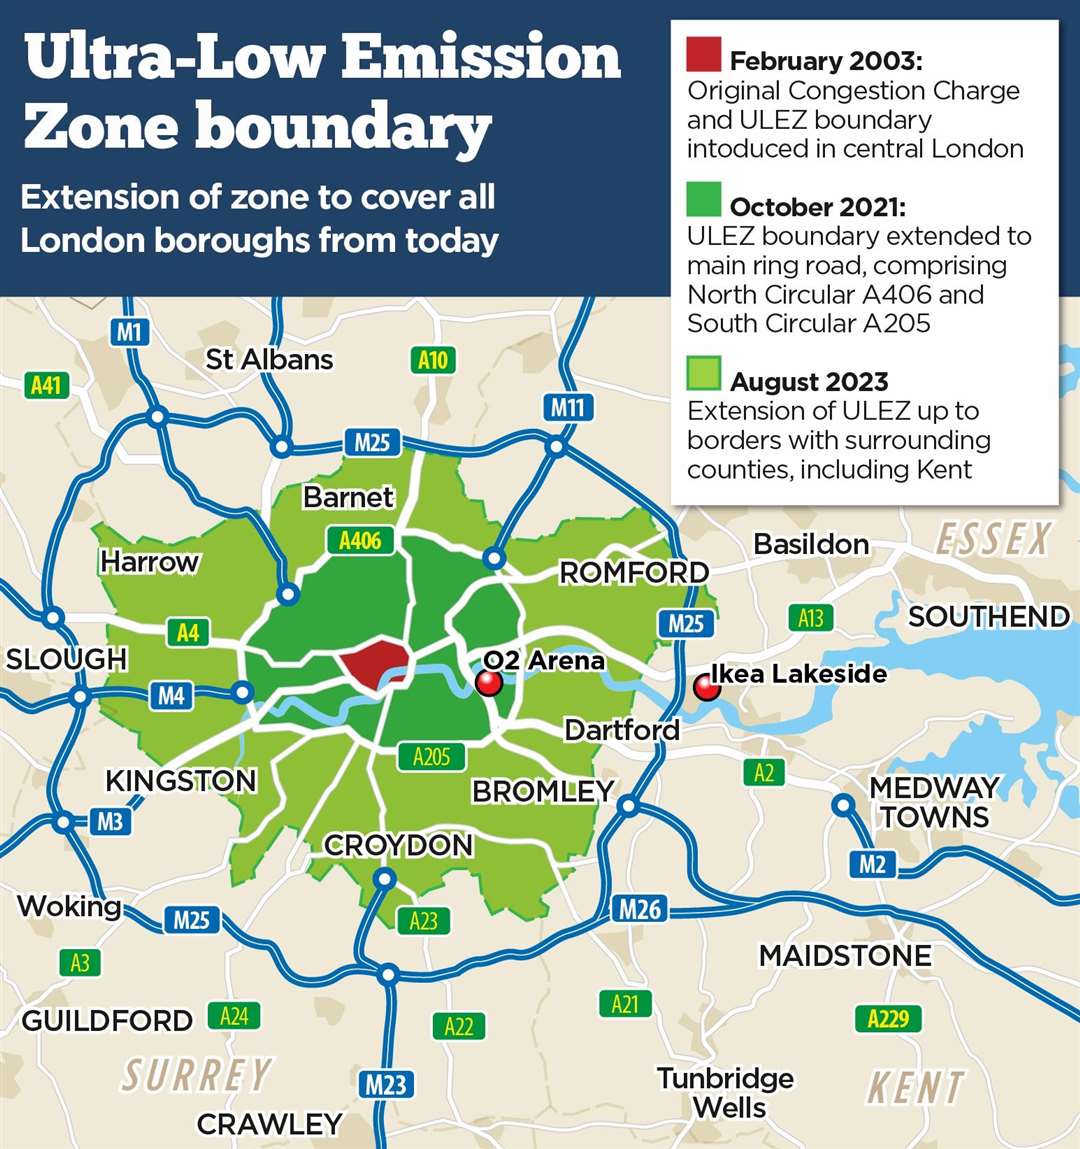 The ULEZ boundary has now extended to cover all London boroughs, as of August 29